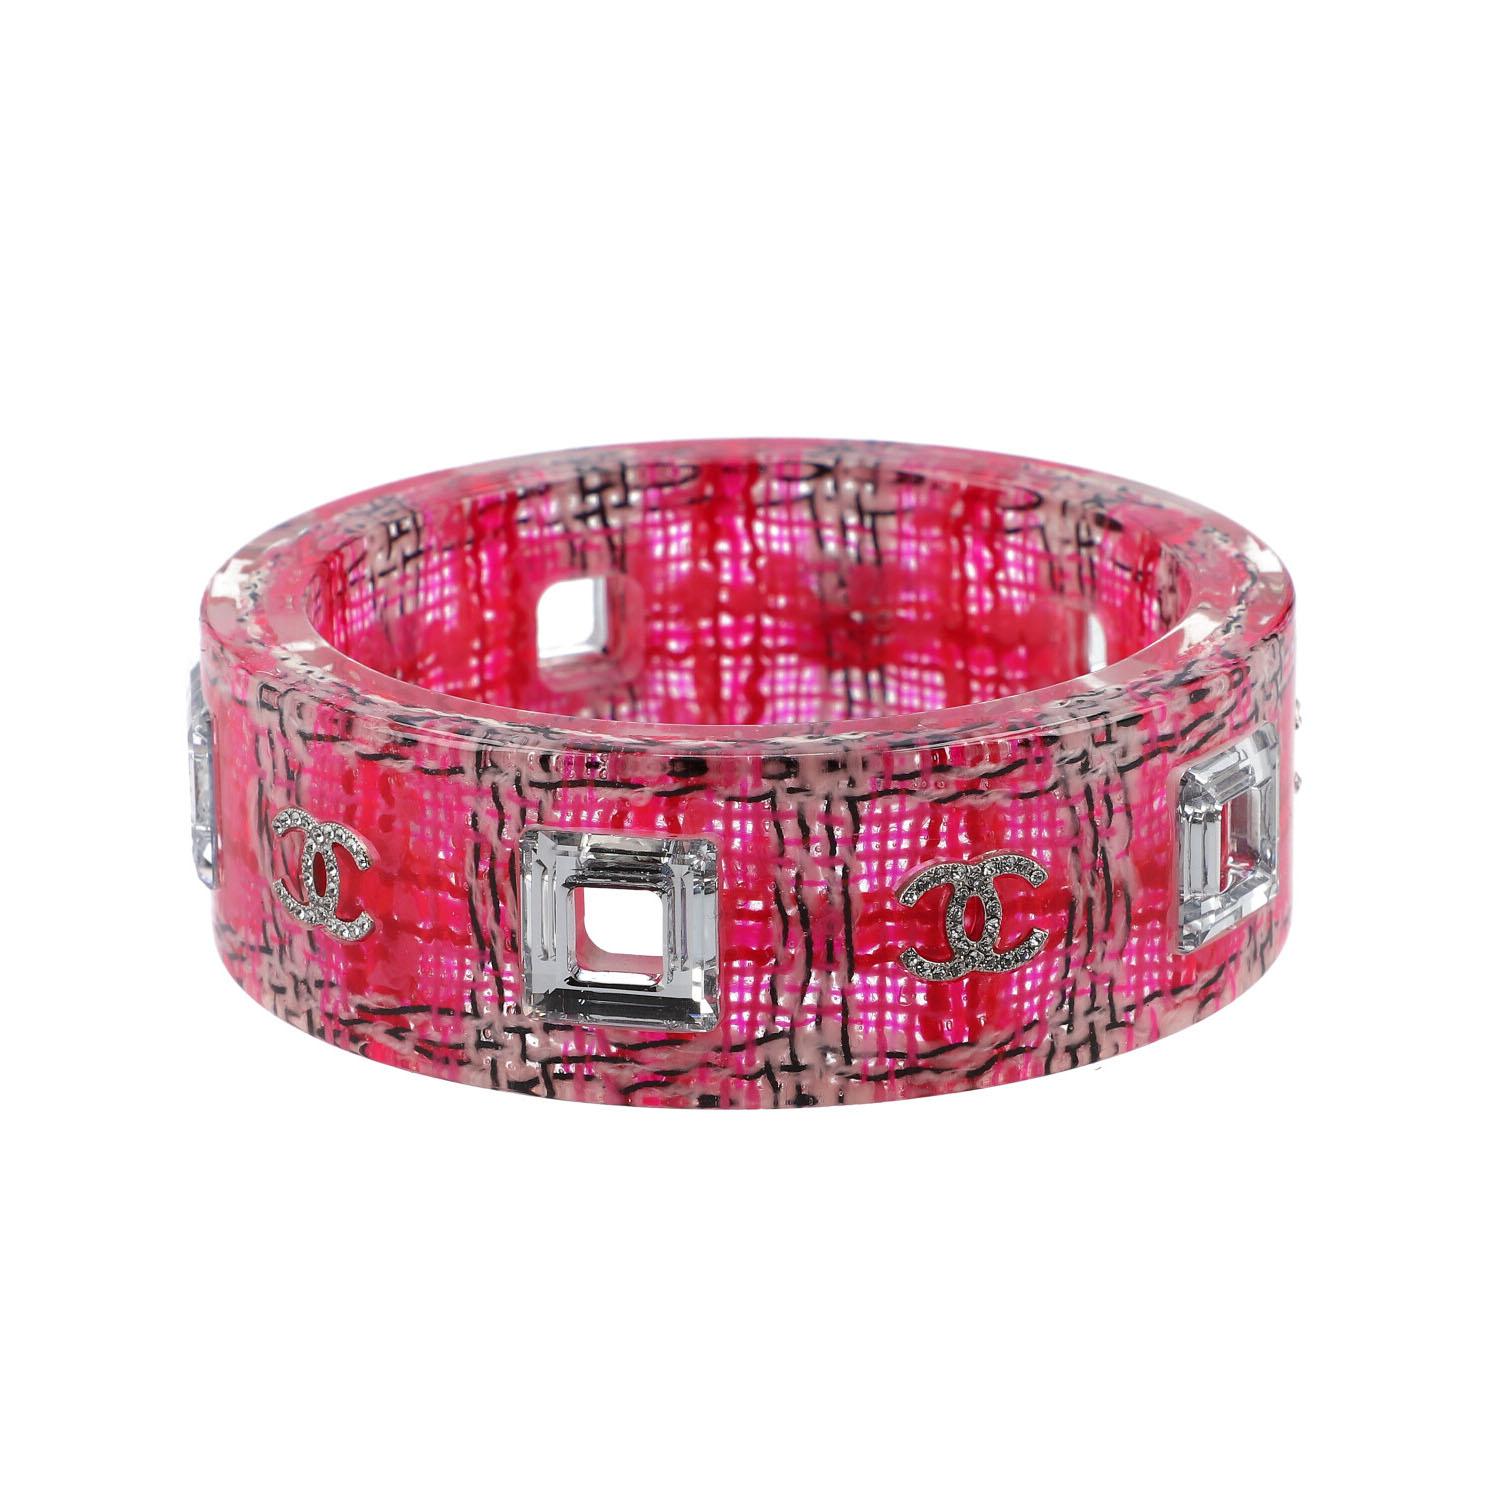 Slightly transparent band with a tweed insert in pink with a subtle checked pattern. Rhinestones and CC logo decor, decorative cut-outs. Very good receipt. With box and copy of the invoice. Diameter 6.5cm.

 CHANEL fashion jewelery bangle, coll.